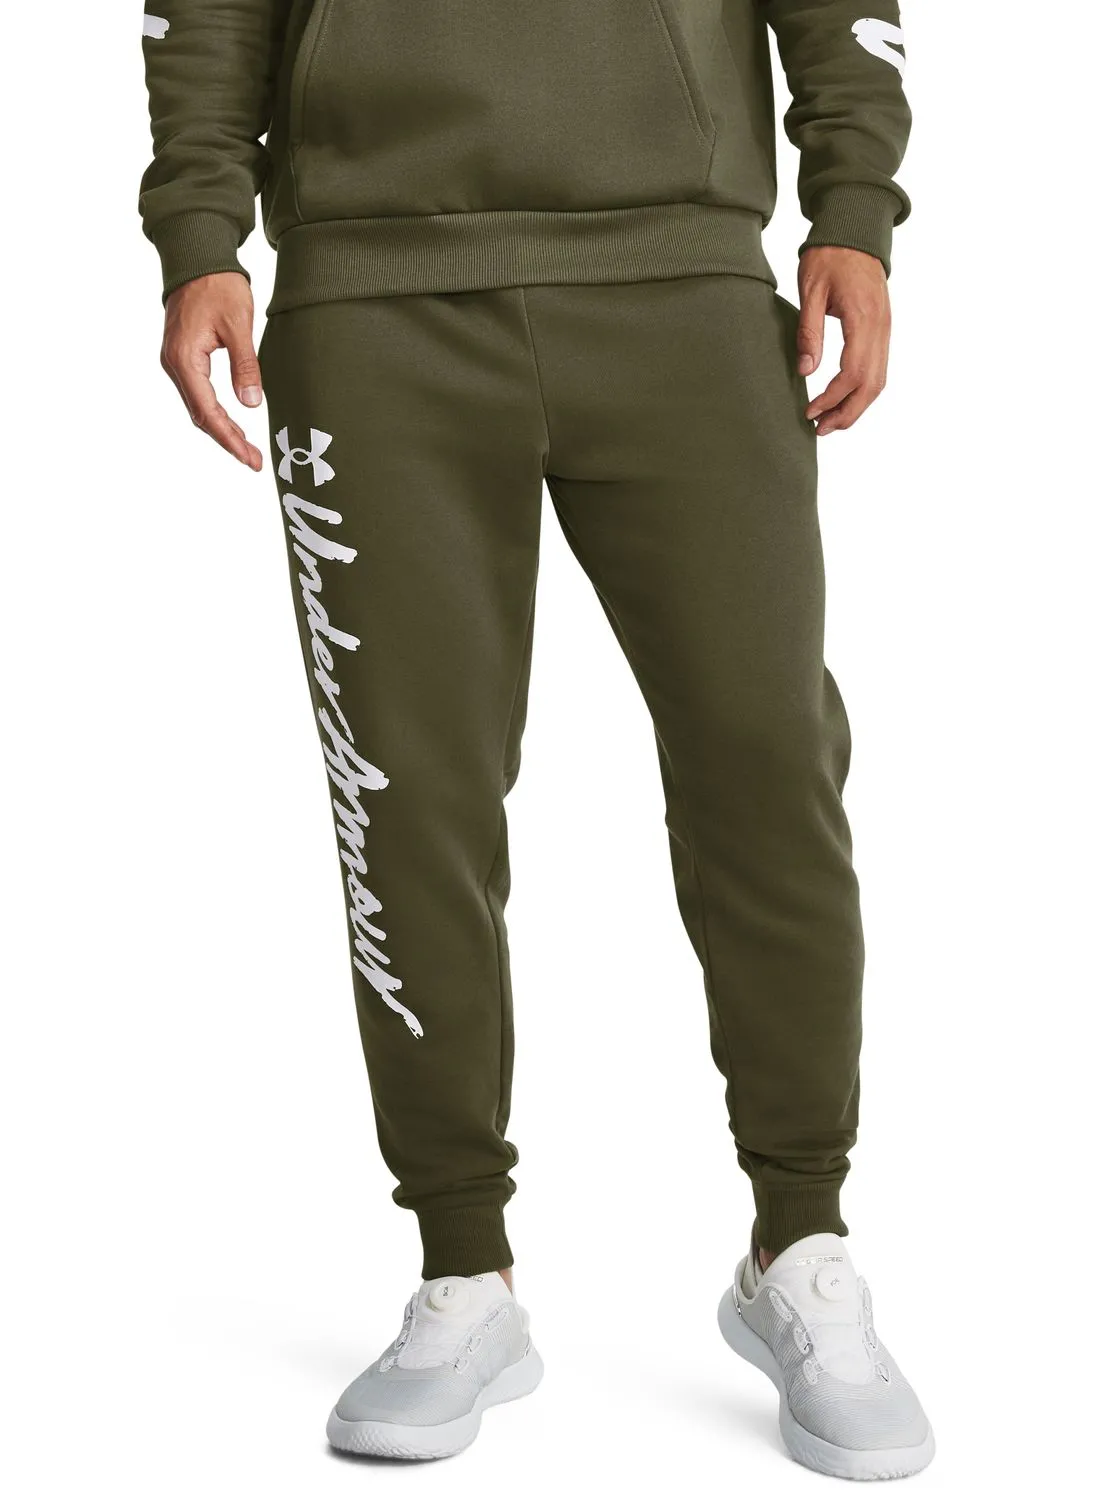 UNDER ARMOUR Rival Fleece Graphic Joggers